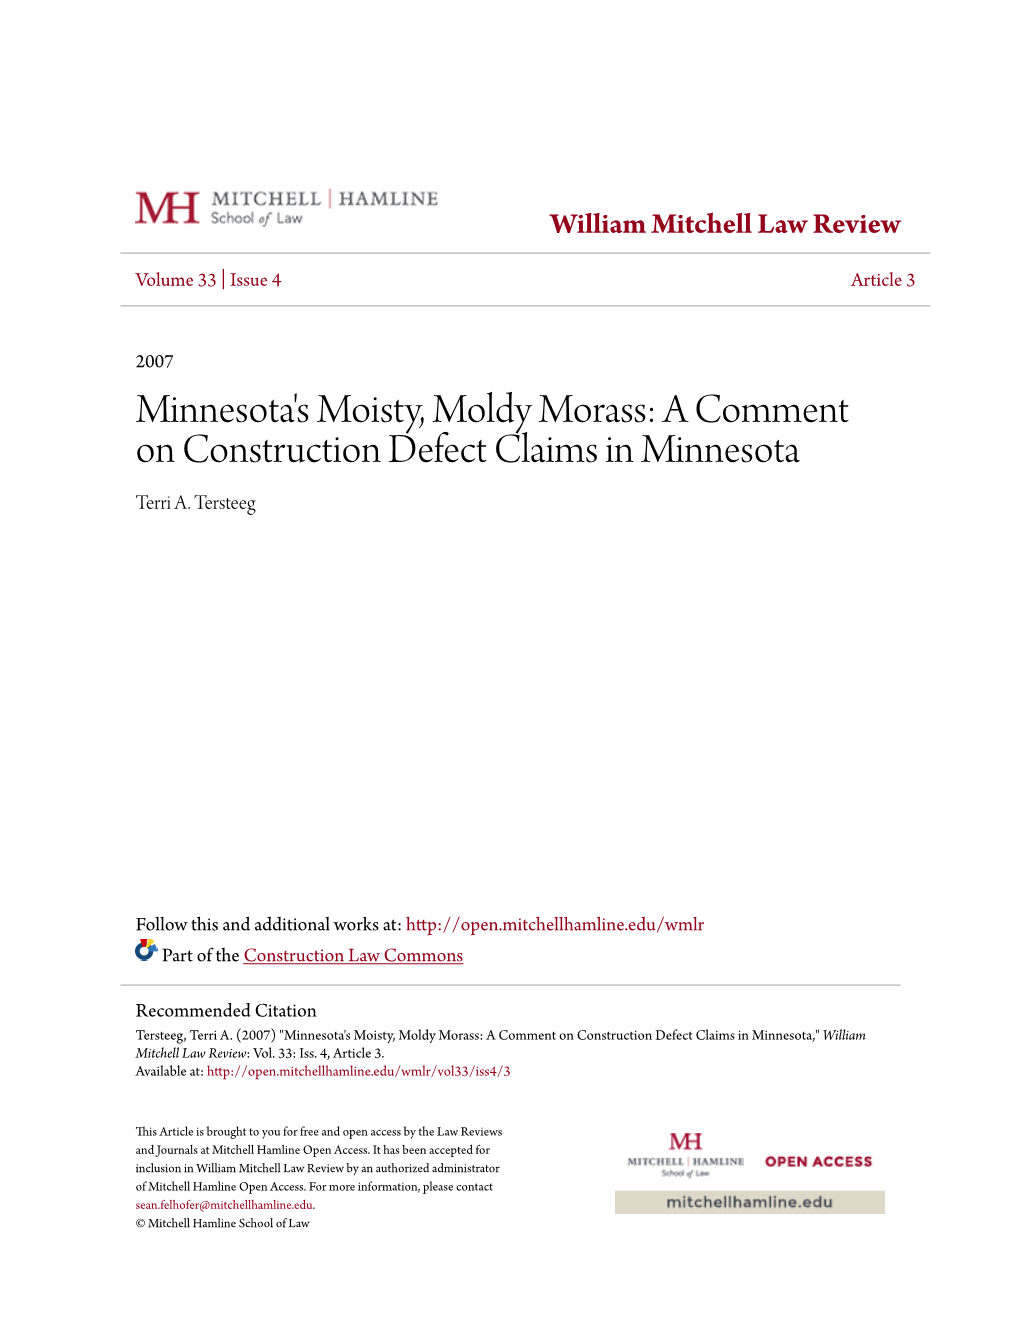 A Comment on Construction Defect Claims in Minnesota Terri A